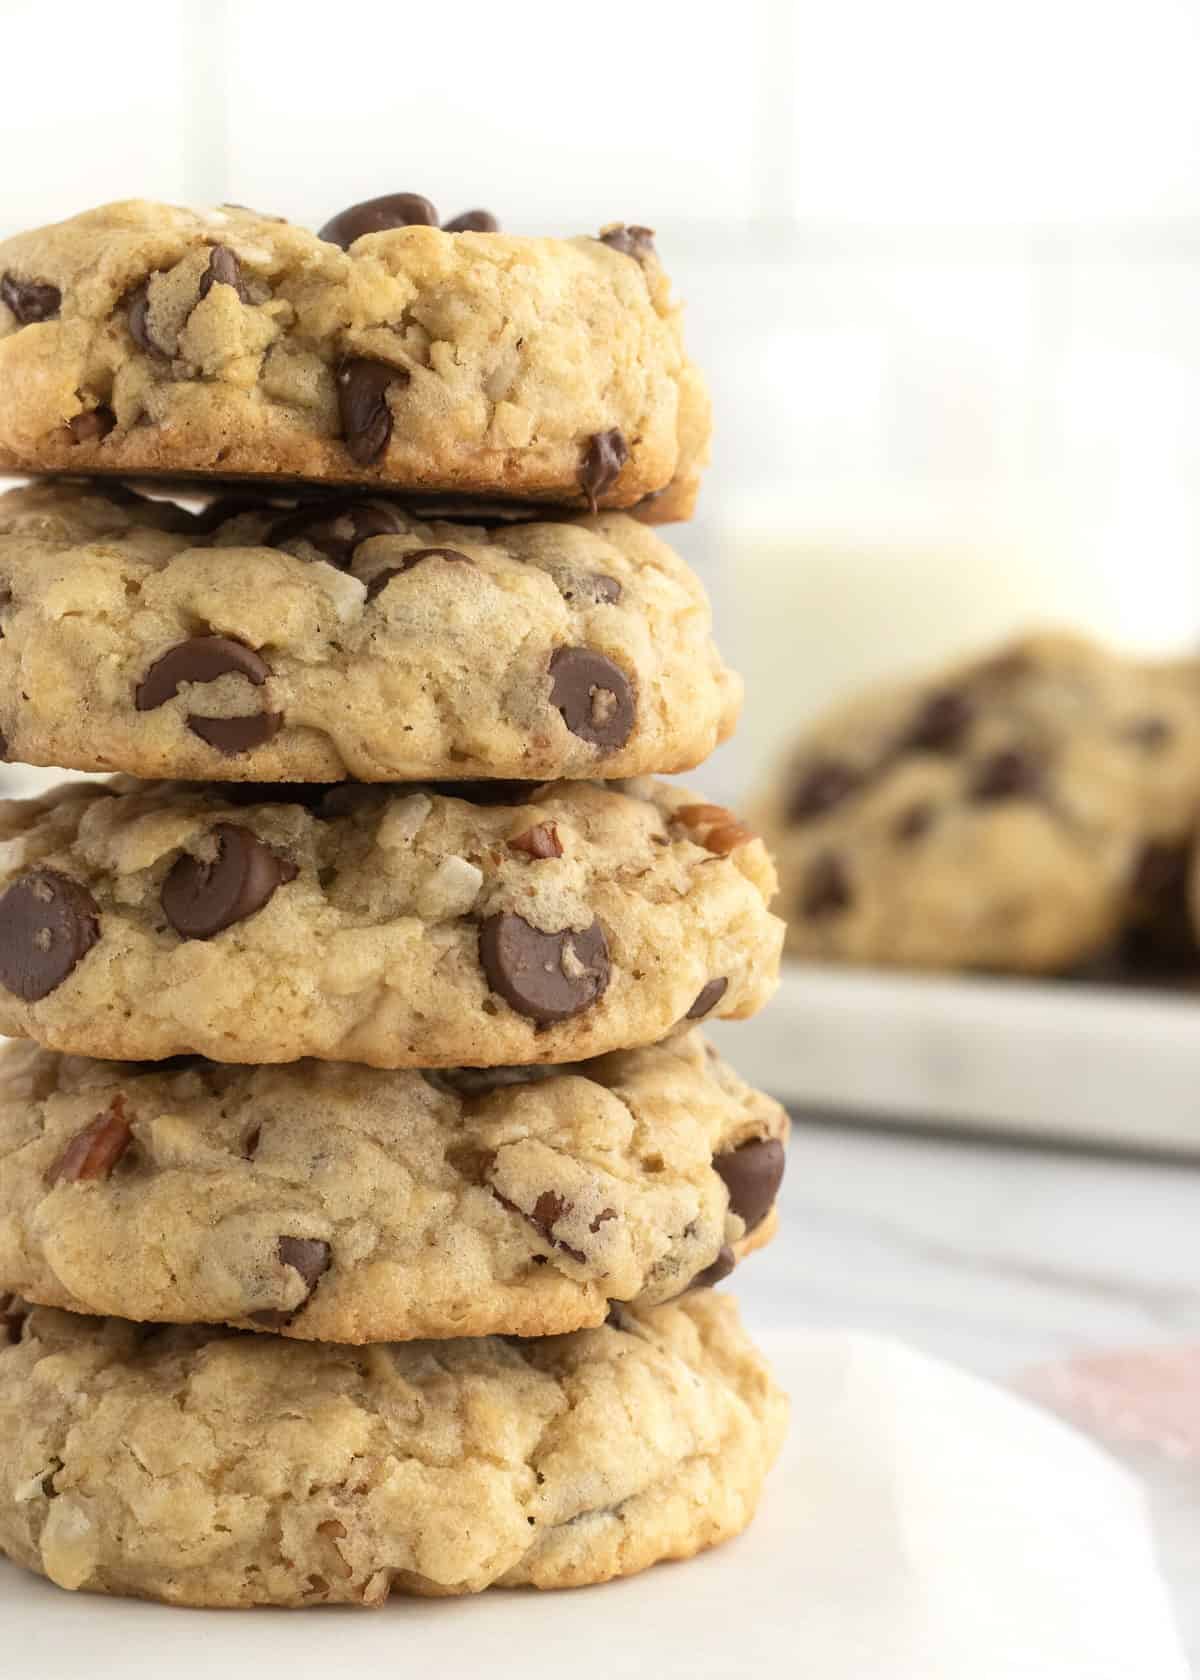 Coconut Pecan Chocolate Chip Oatmeal Cookies by The BakerMama